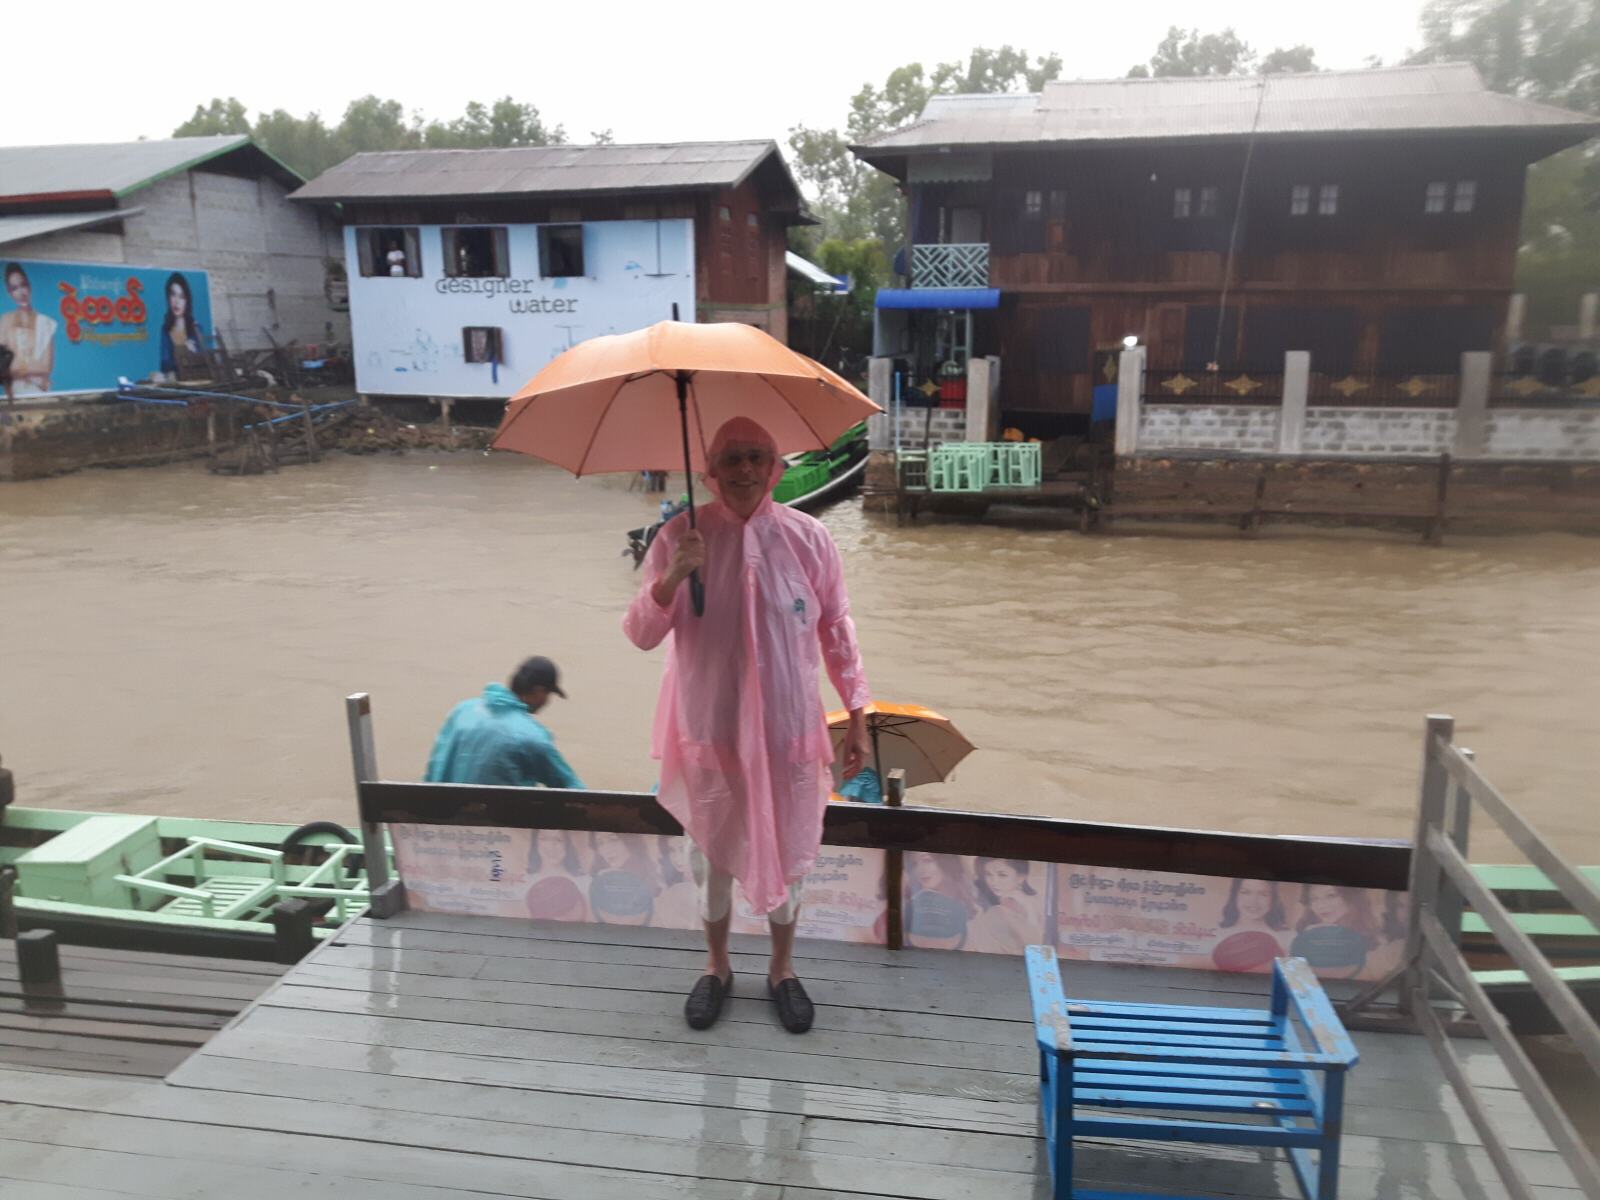 In the rainstorm at Inle lake